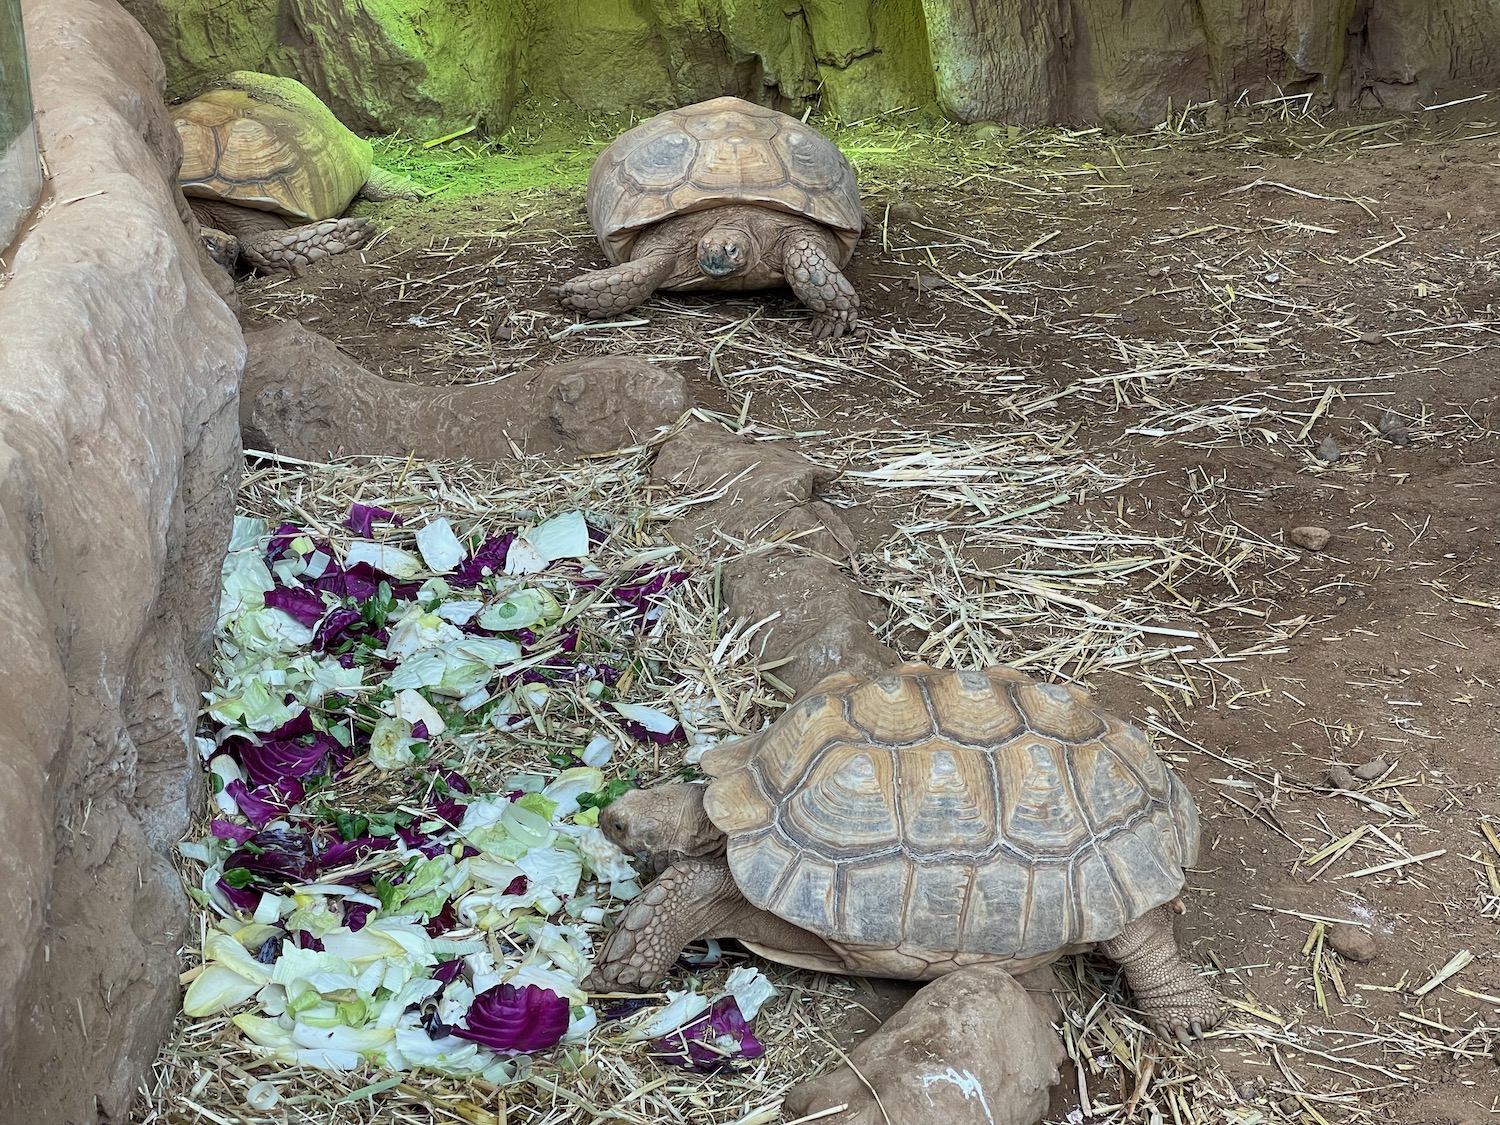 a group of tortoises eating leaves